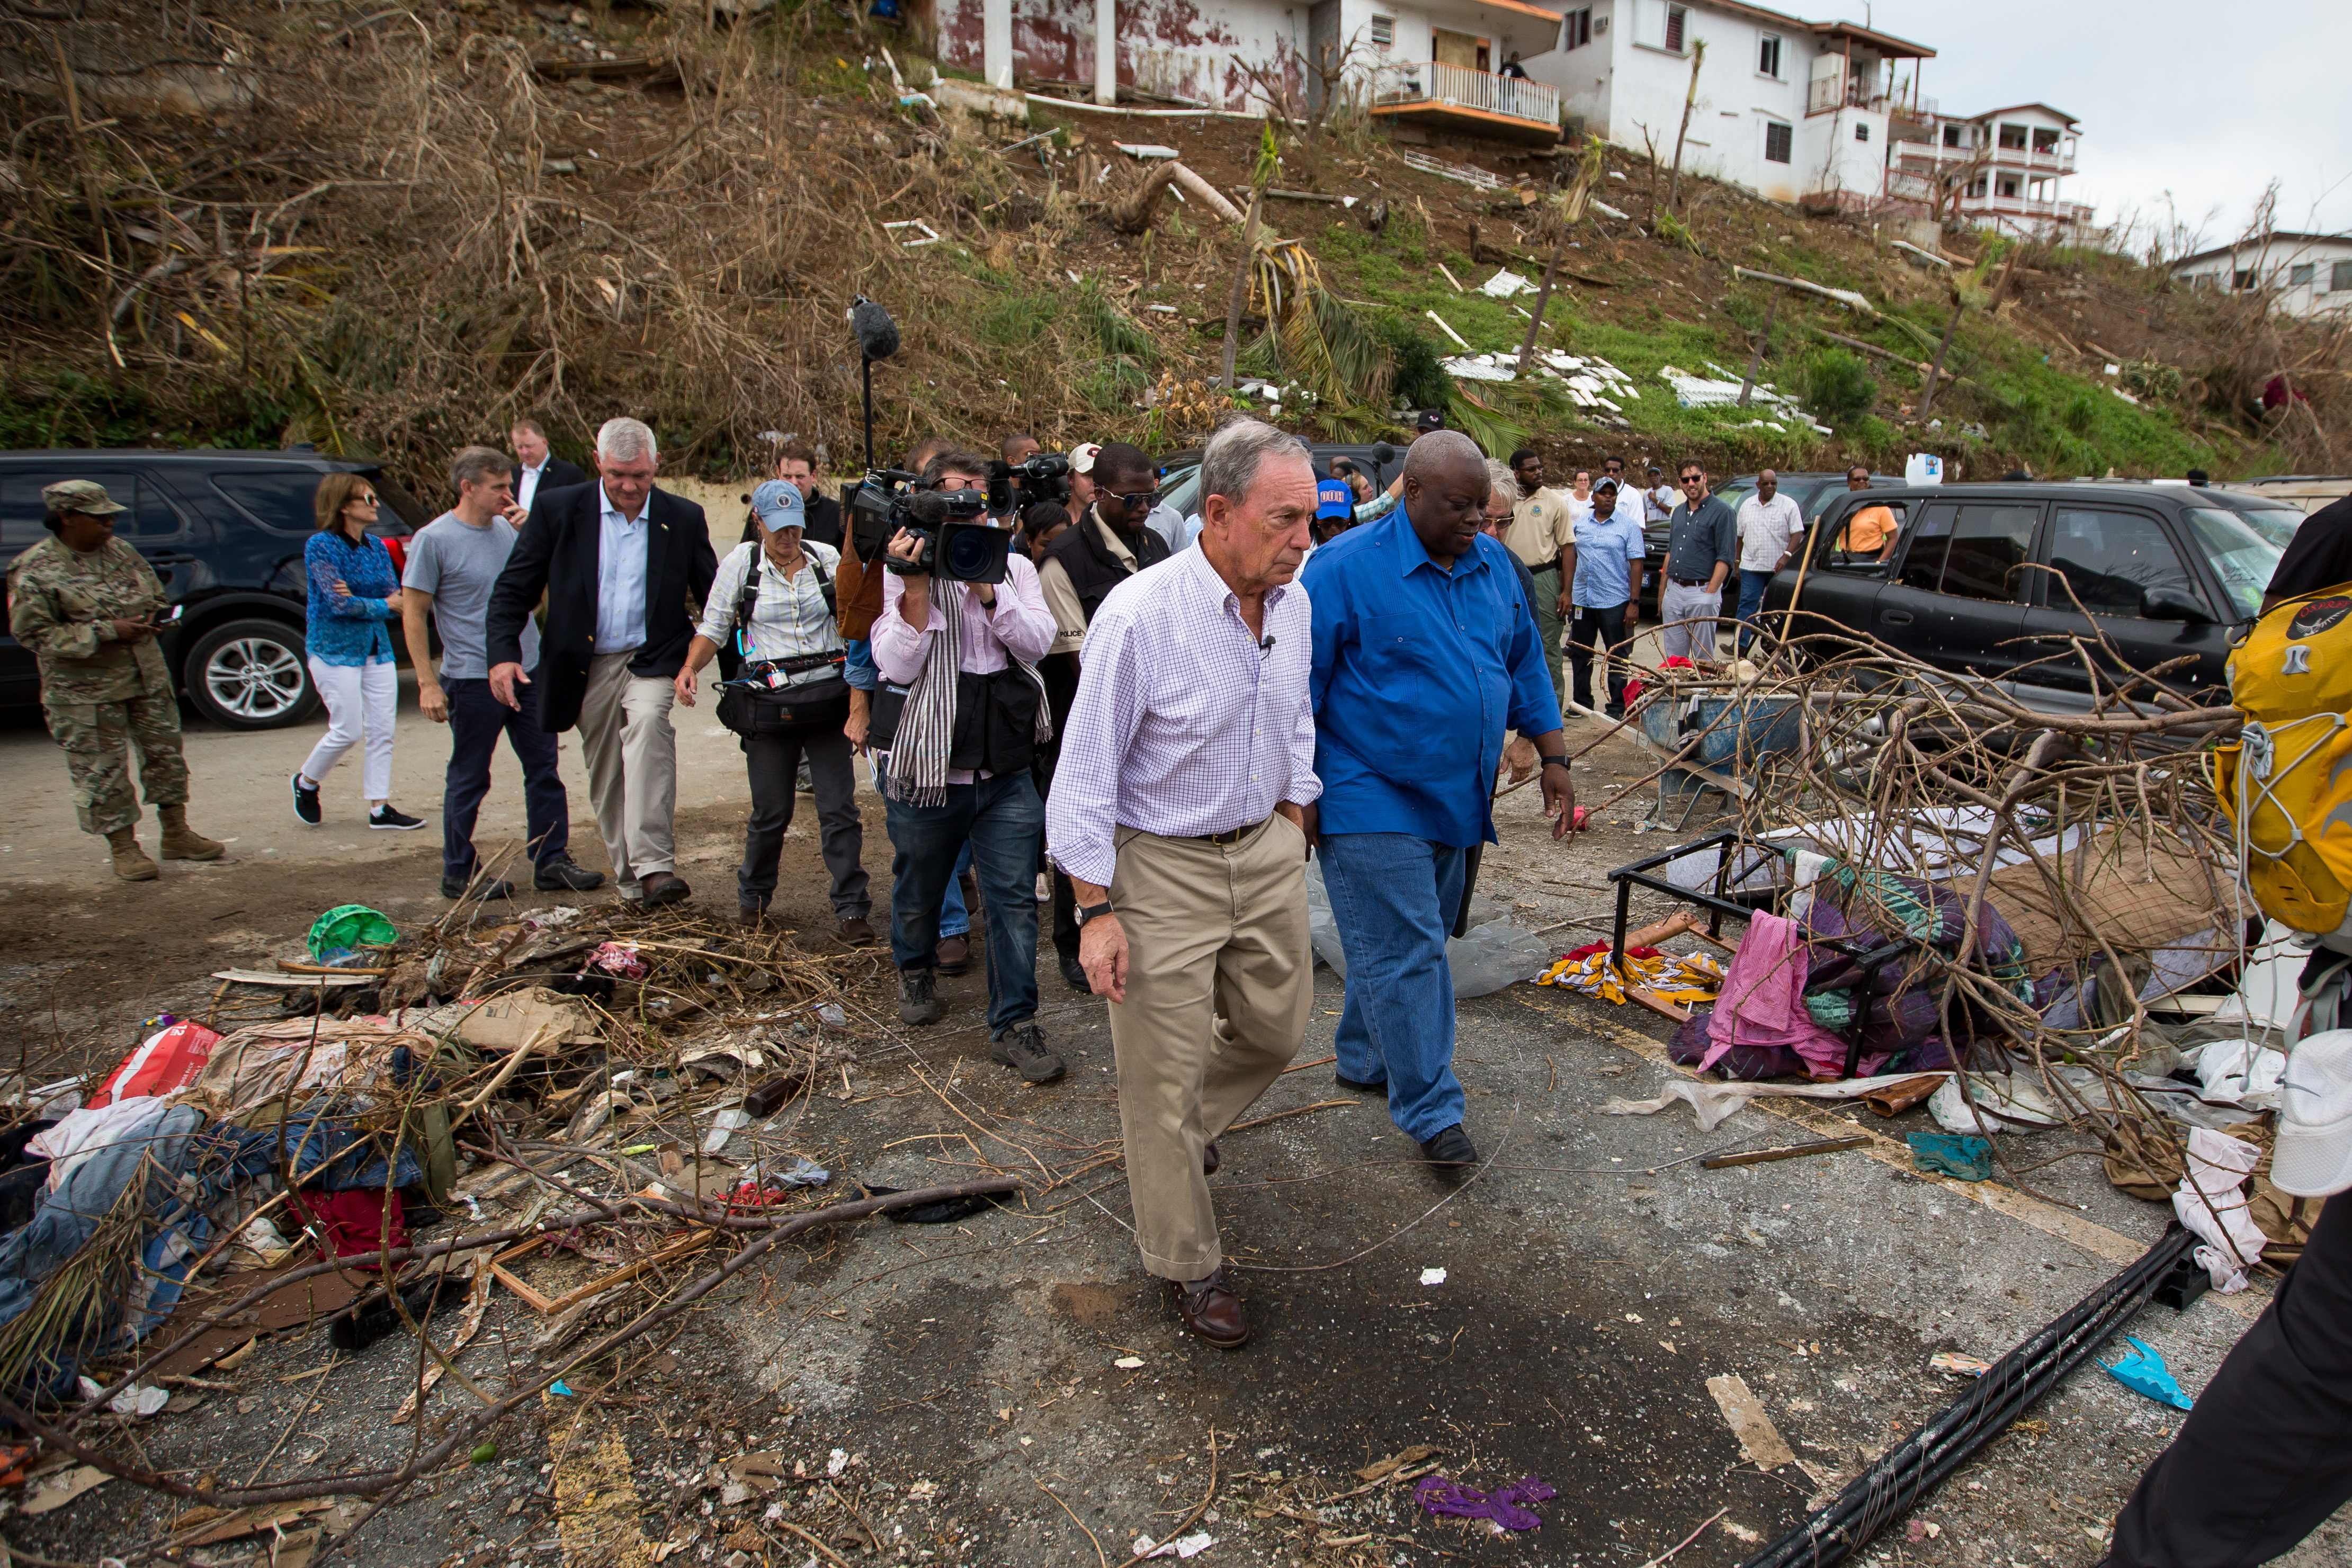 HURRICANE RECOVERY: Virgin Islands Has The Help of A Very Powerful Ally Behind The Scenes In Billionaire-Former New York City Mayor Michael Bloomberg